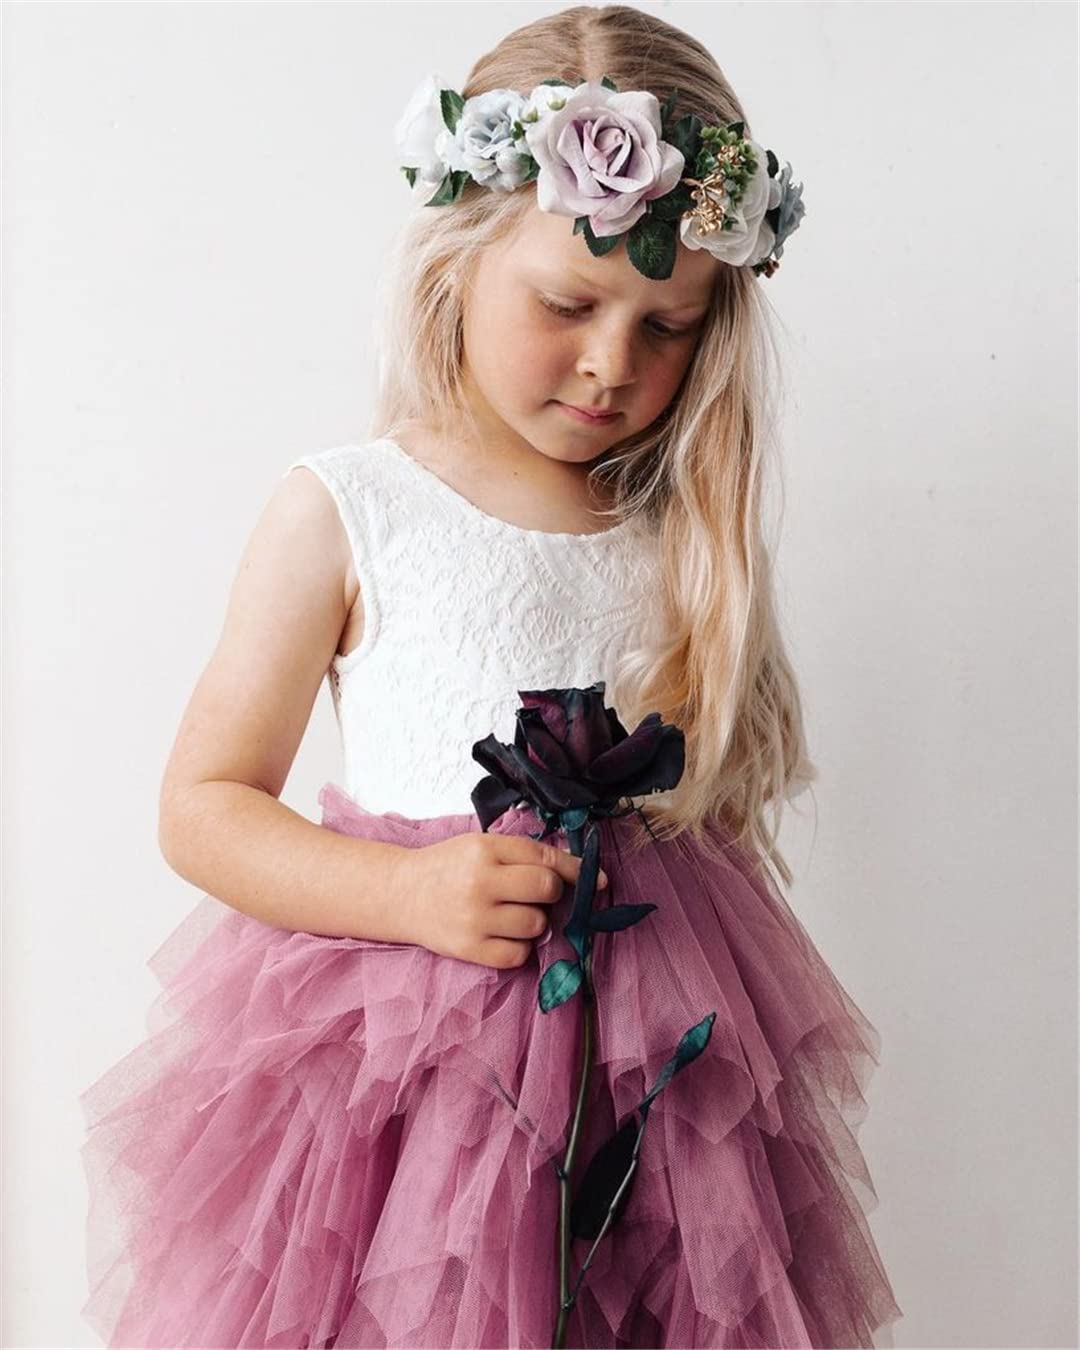 2Bunnies Flower Girl Dress Peony Lace Back A-Line Sleeveless Tiered Tulle Short (Mauve) - 2BUNNIES